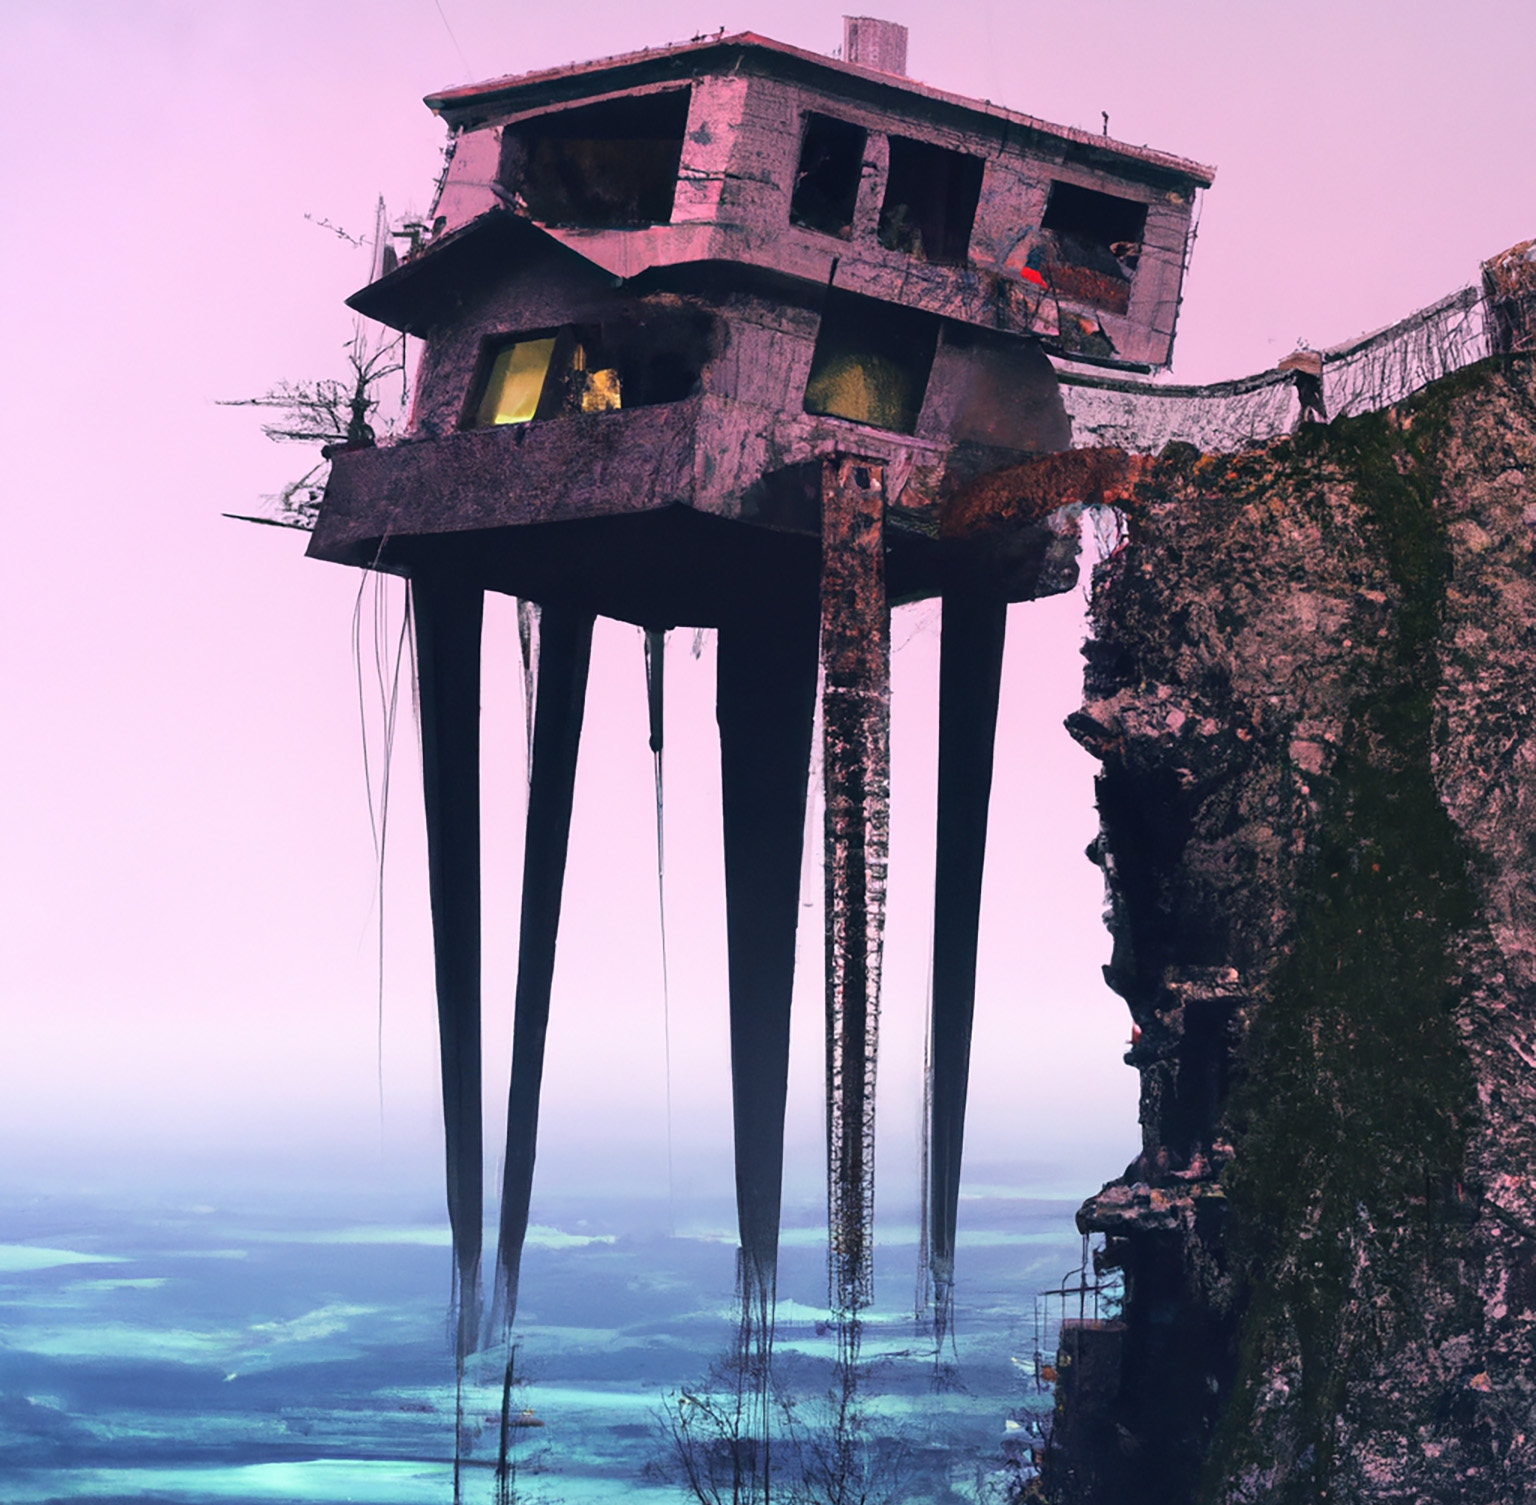 AI Art of a building with a poorly planned foundation. It is high on stilts above the ocean, with a bridge to the land.